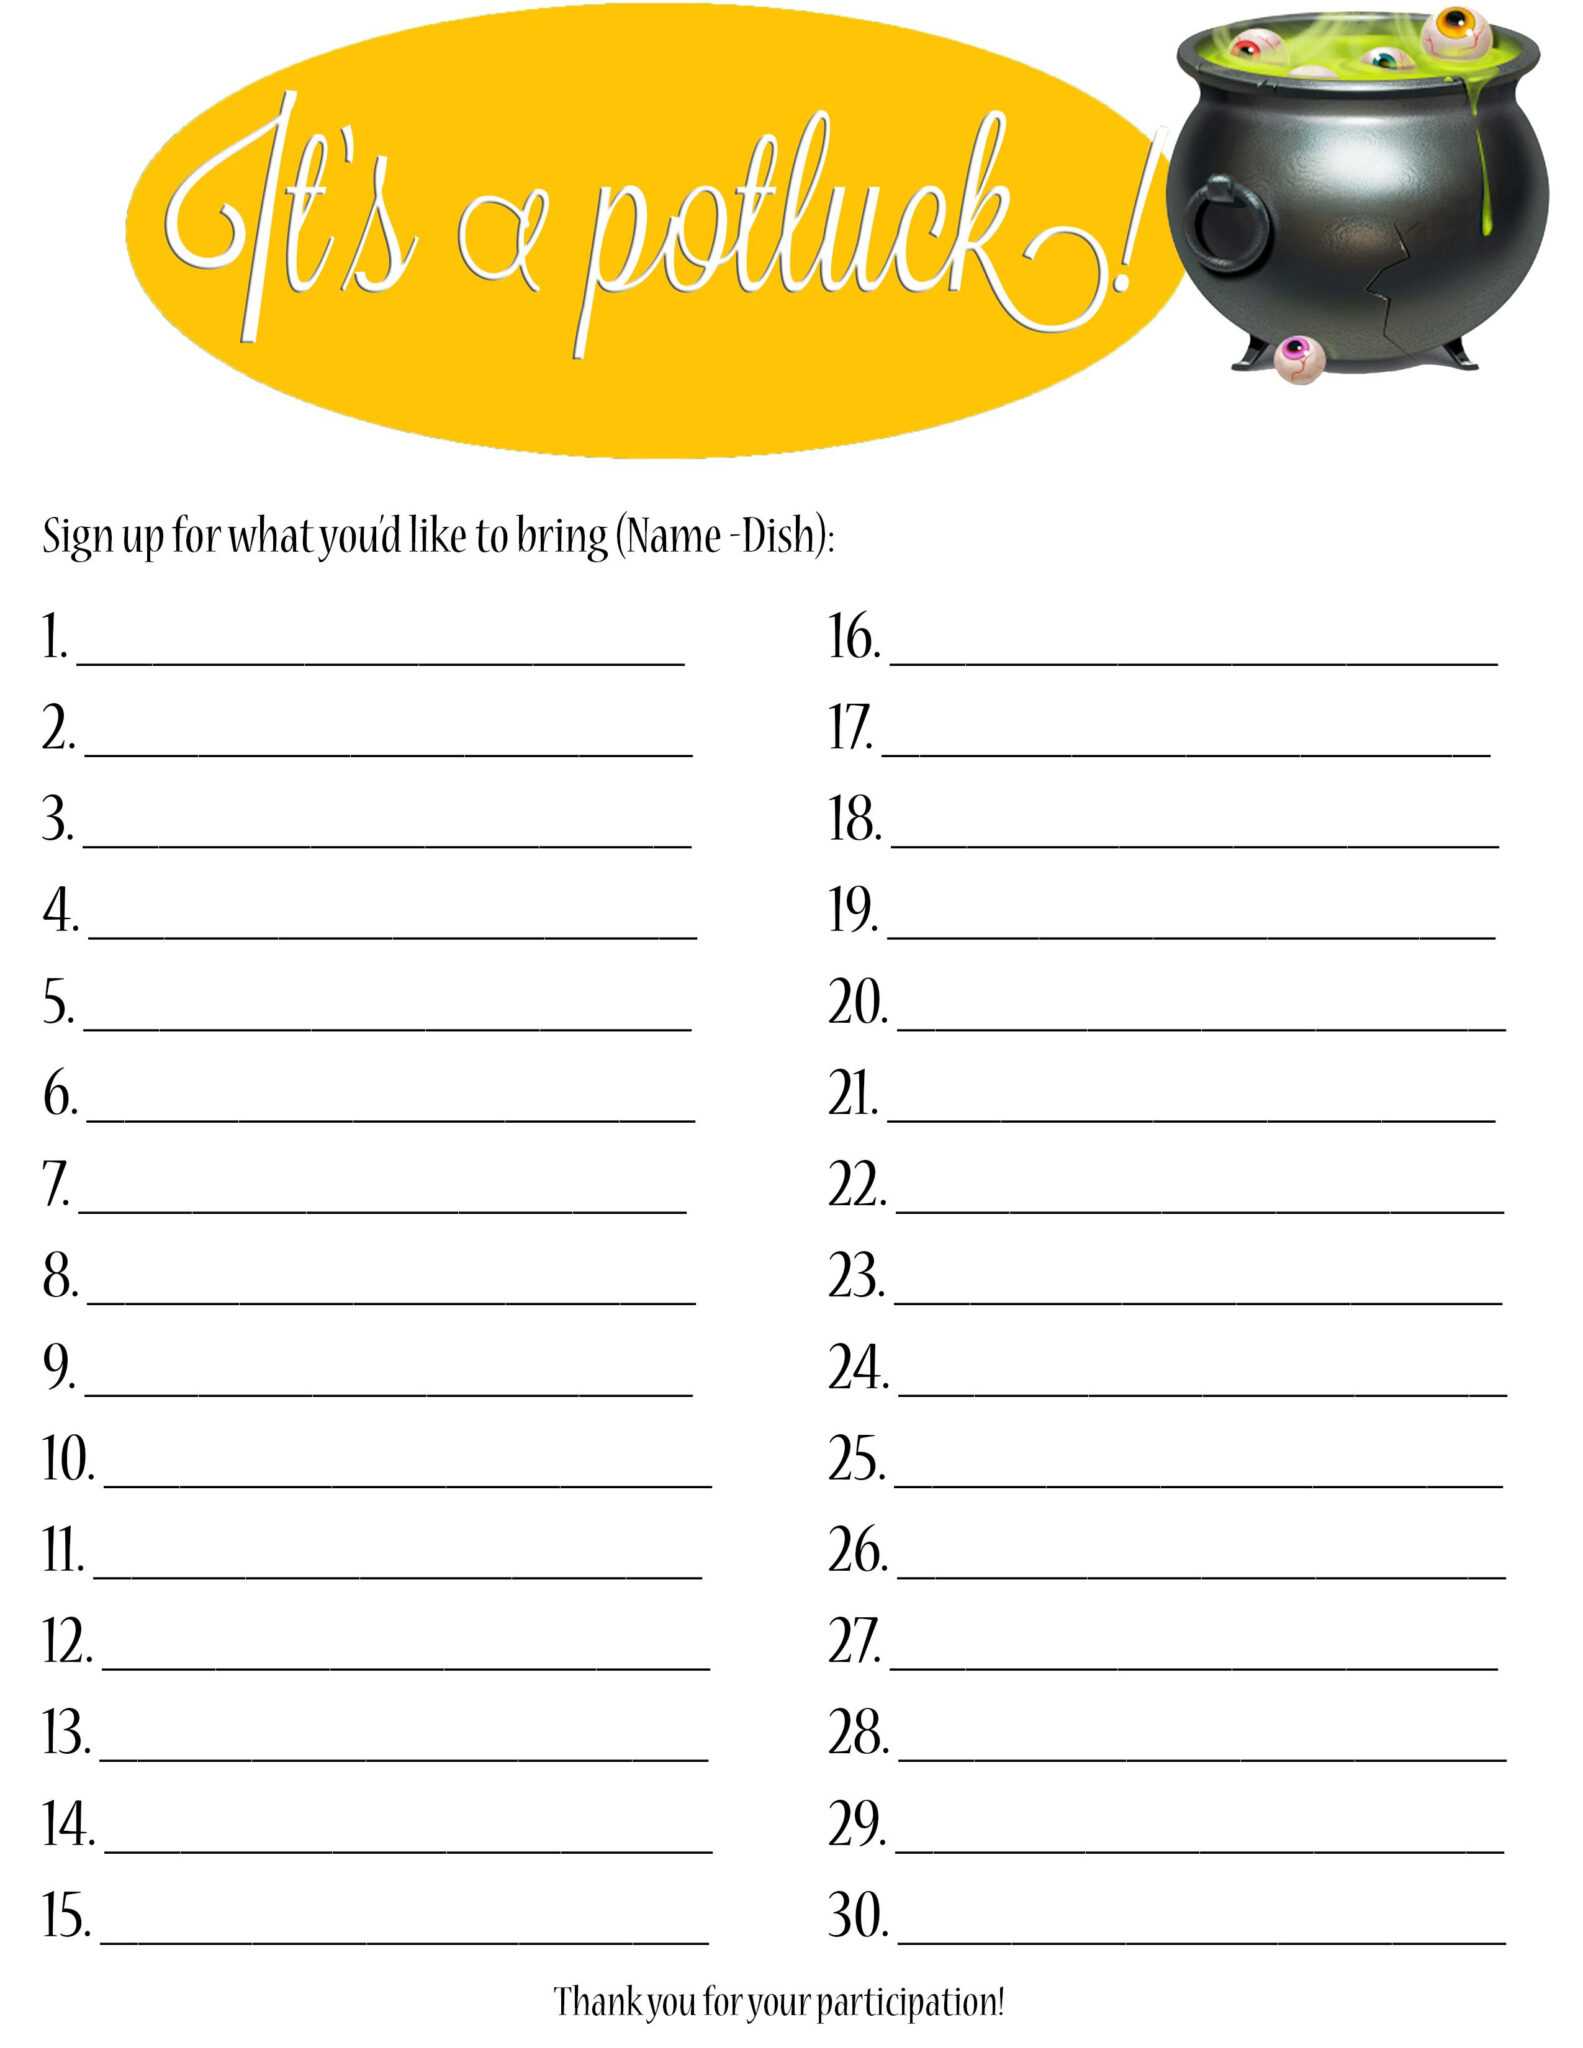 potluck-sign-up-sheet-printable-some-of-them-are-mentioned-below